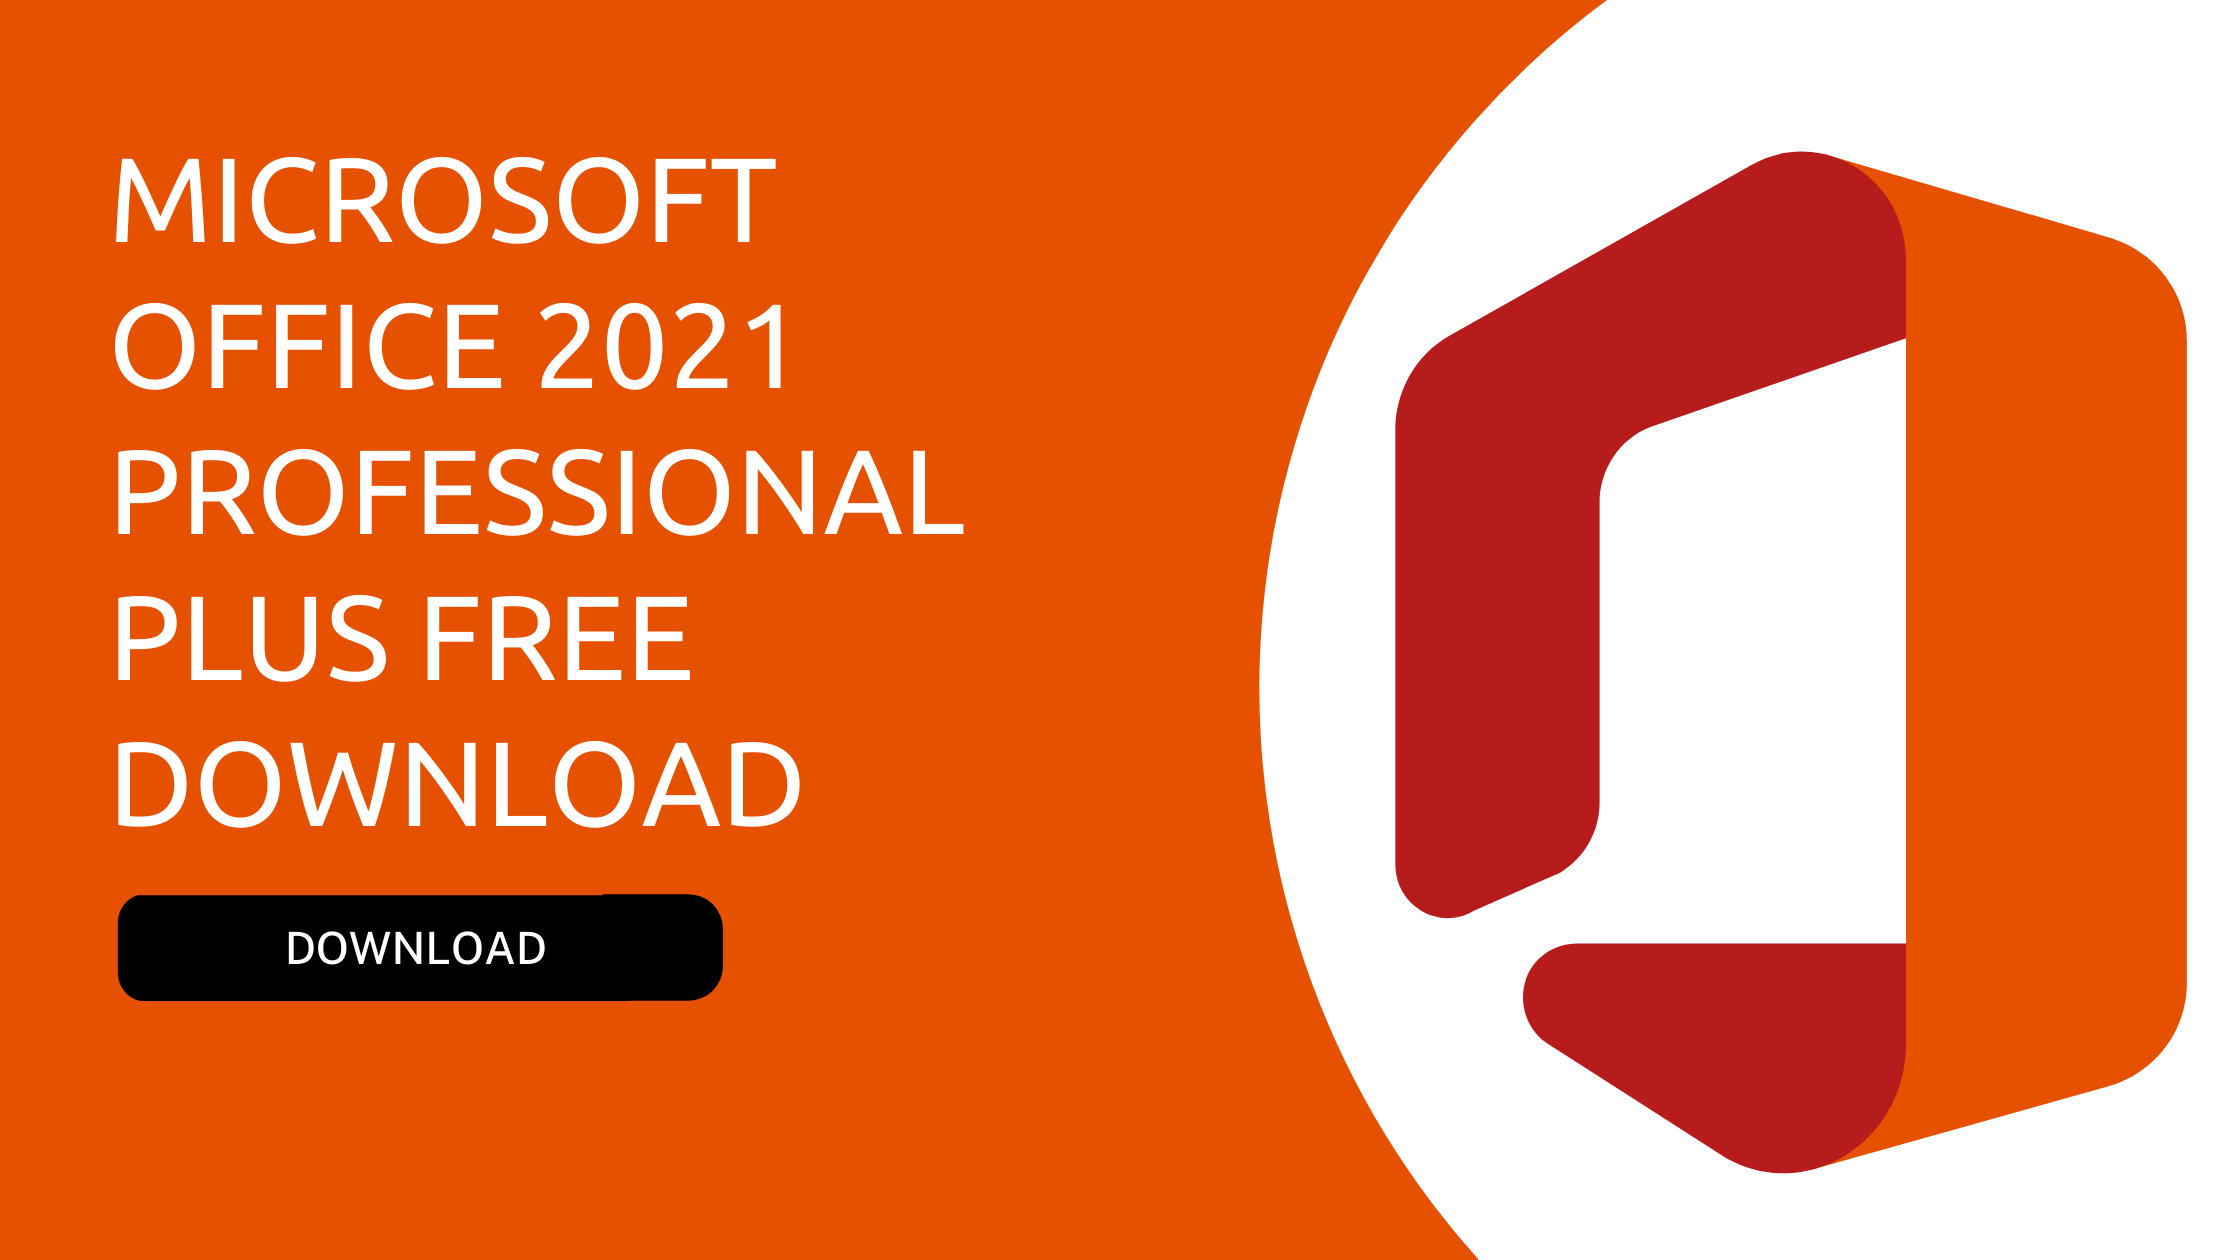 Download microsoft office full version free how to download games on pc for free